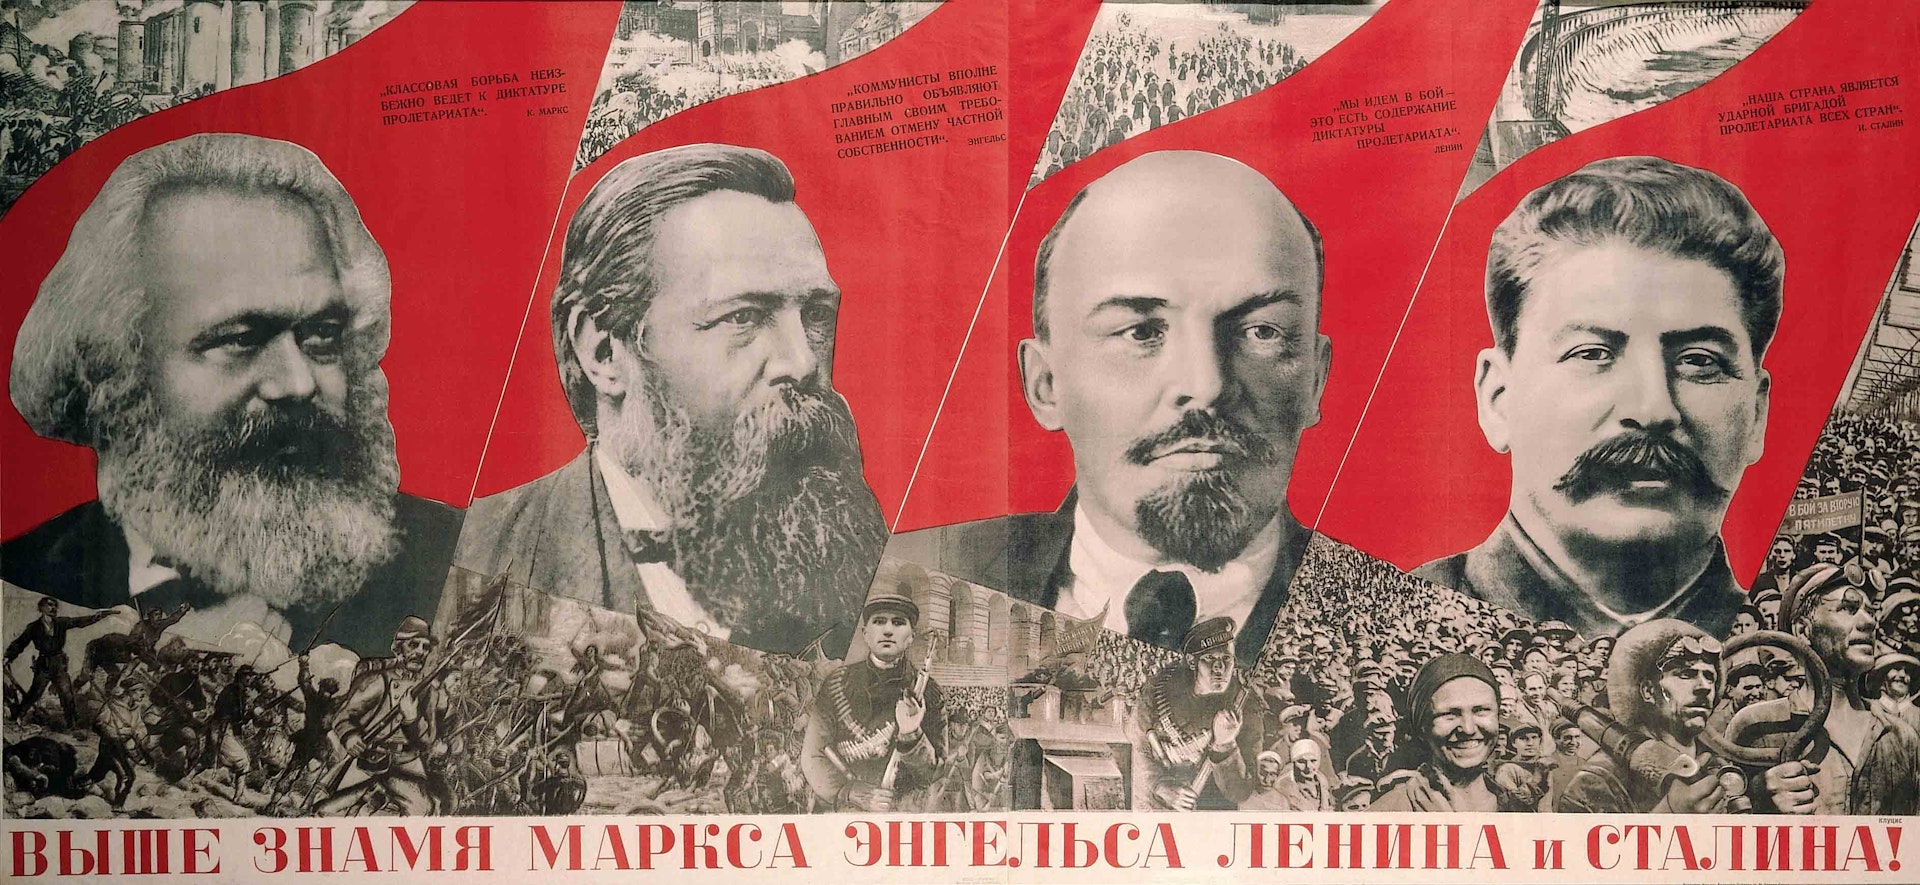 Raise Higher the Banner of Marx, Engels, Lenin and Stalin!, Gustav Klutsis, 1933. Purchased 2016. The David King Collection at Tate